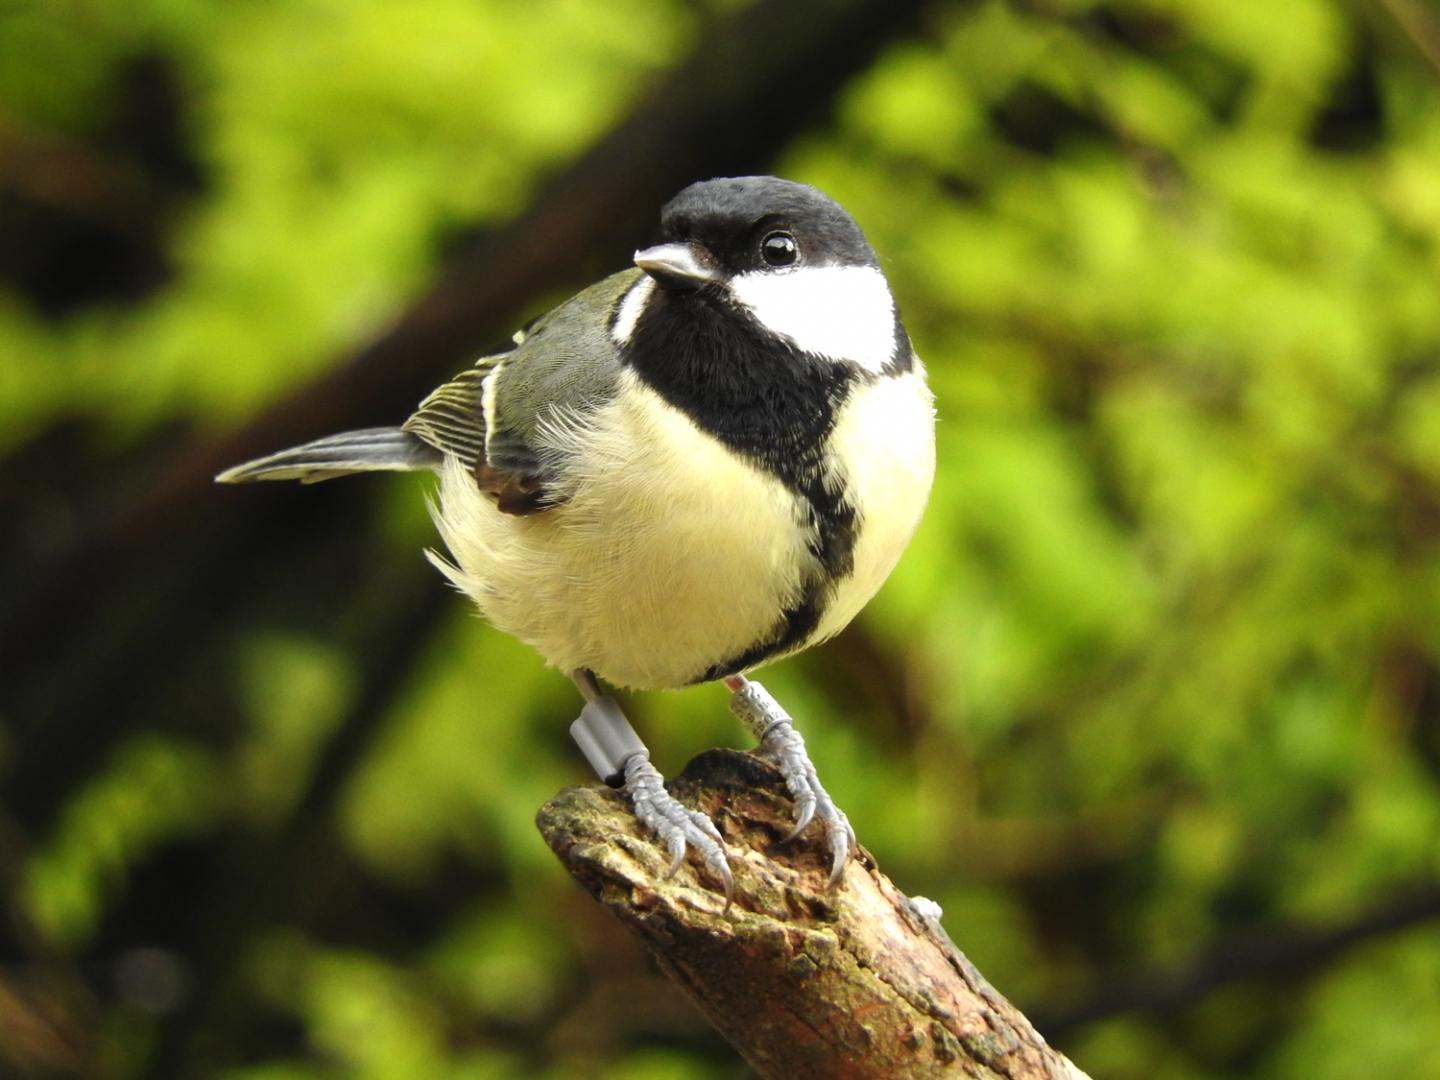 Great Tit with Radio-frequency Identification (RFID)